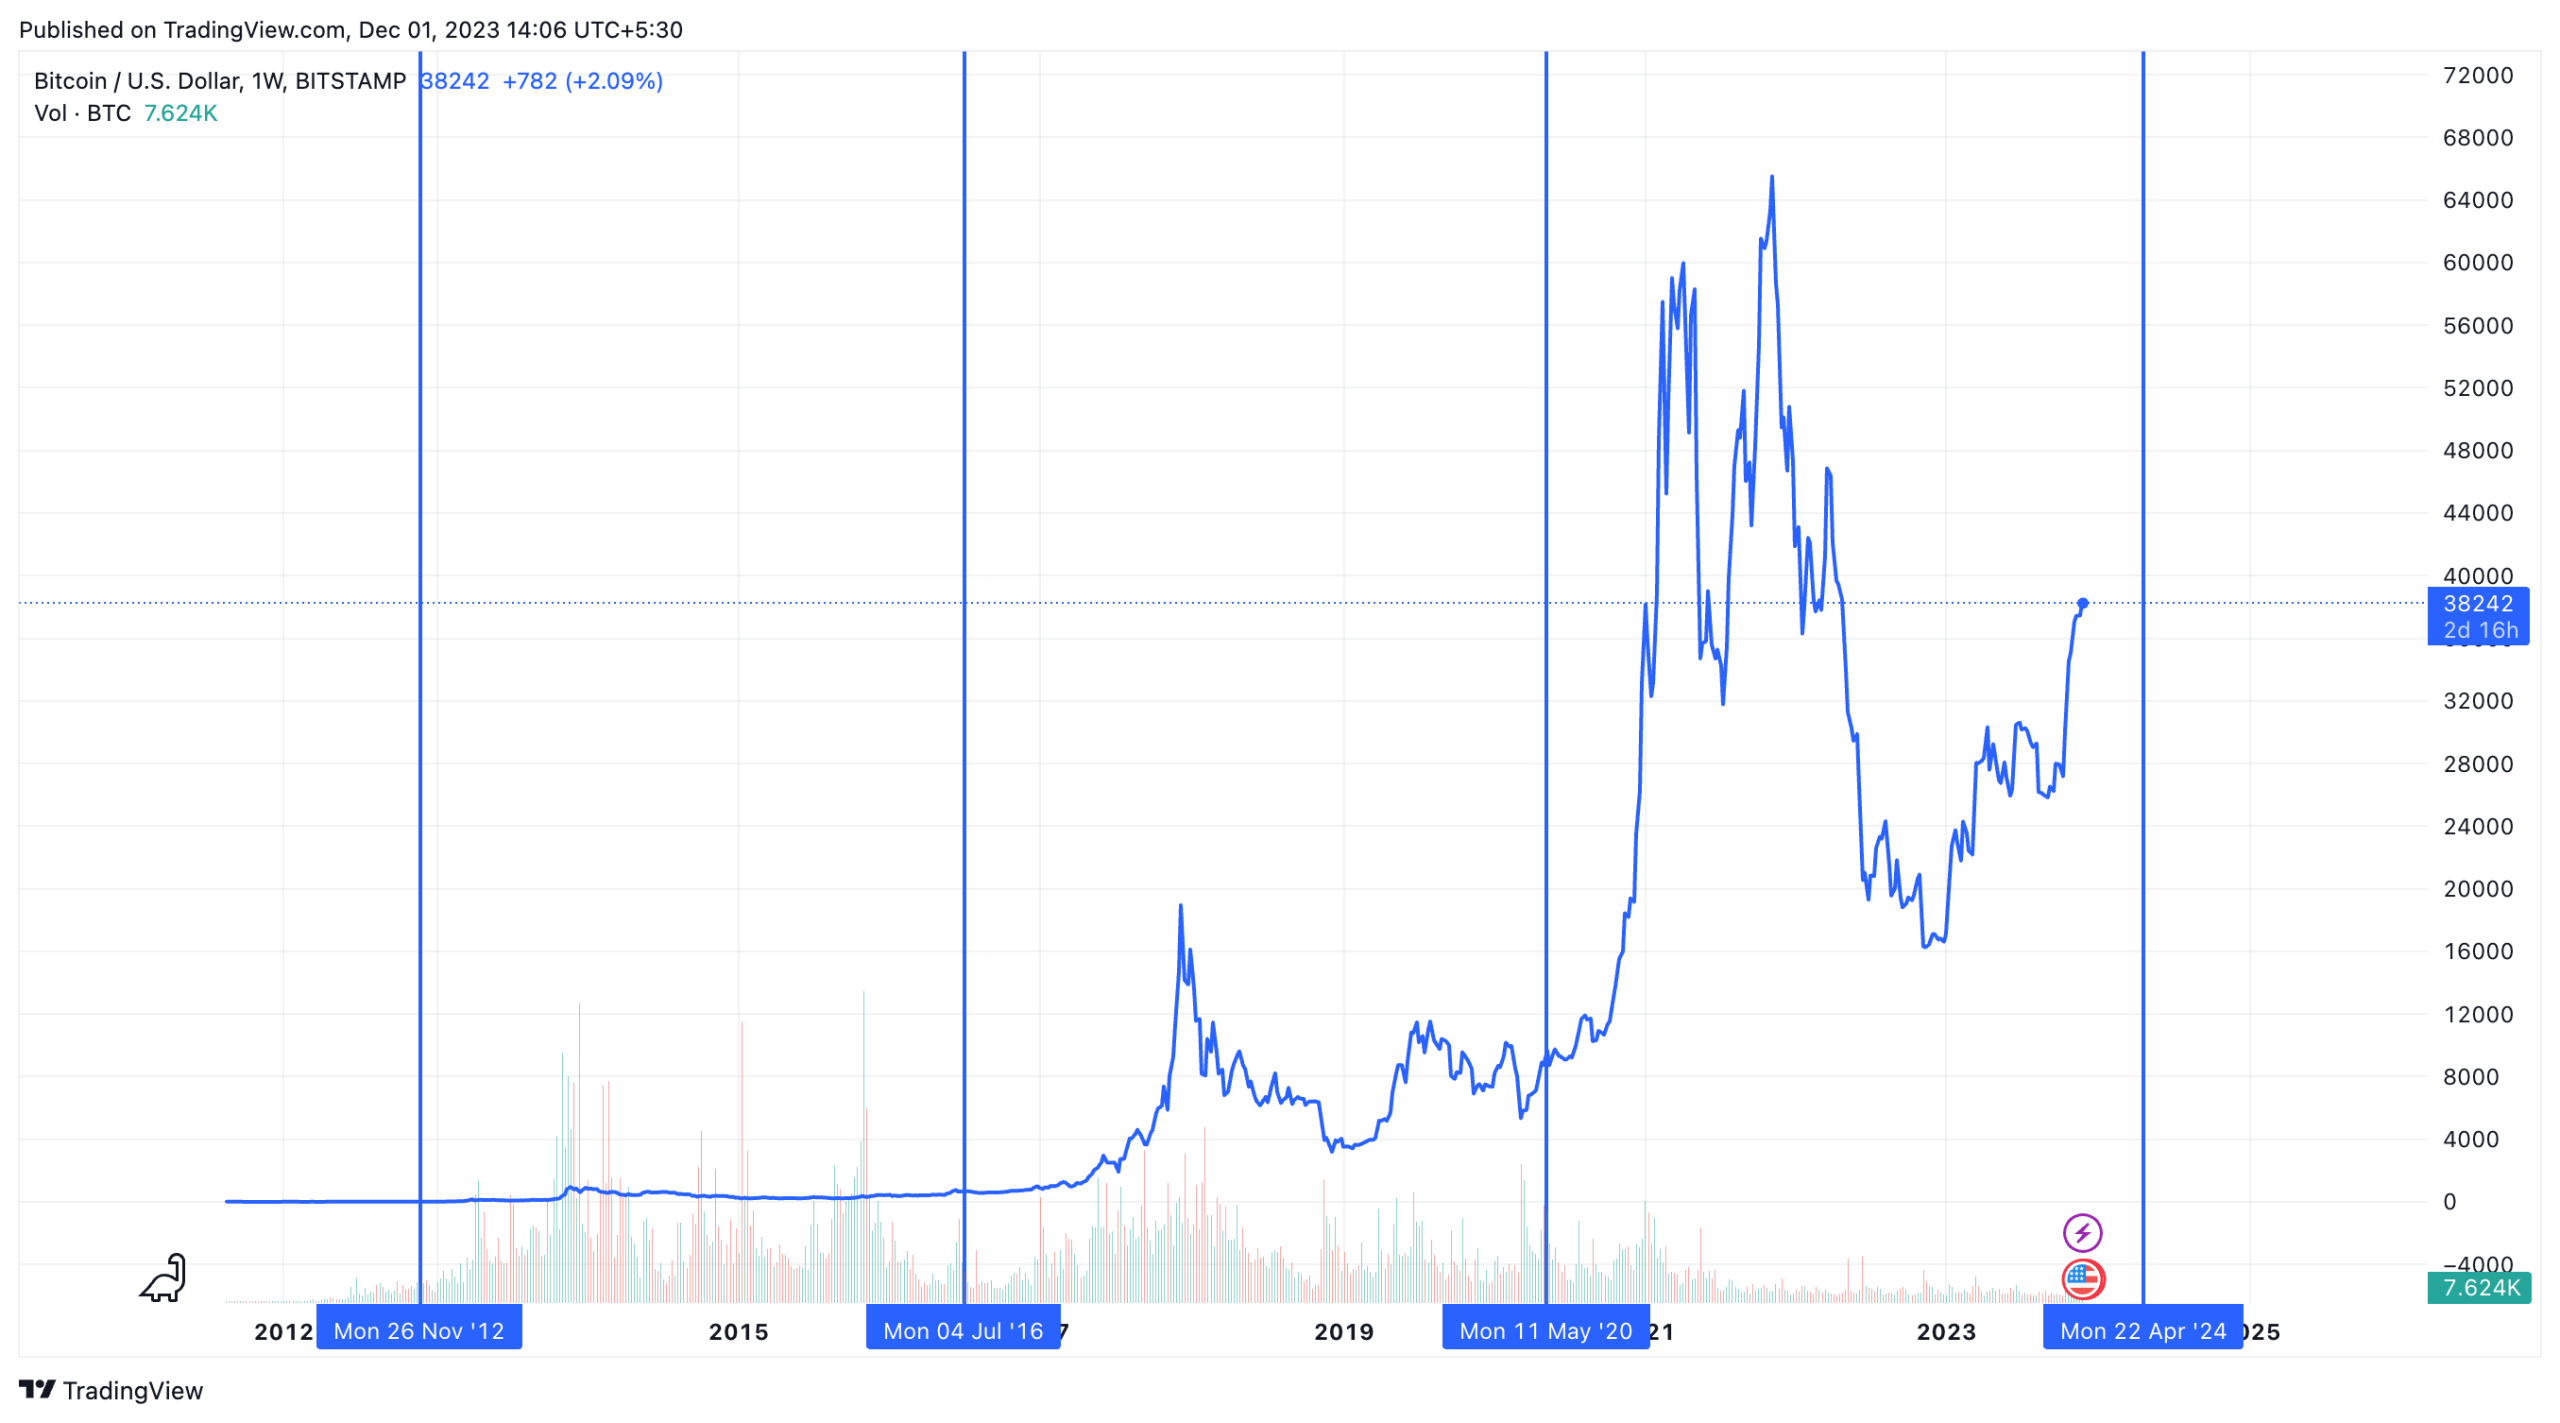 Bitcoin price chart indicating halving events in 2012, 2016, 2020 and 2024